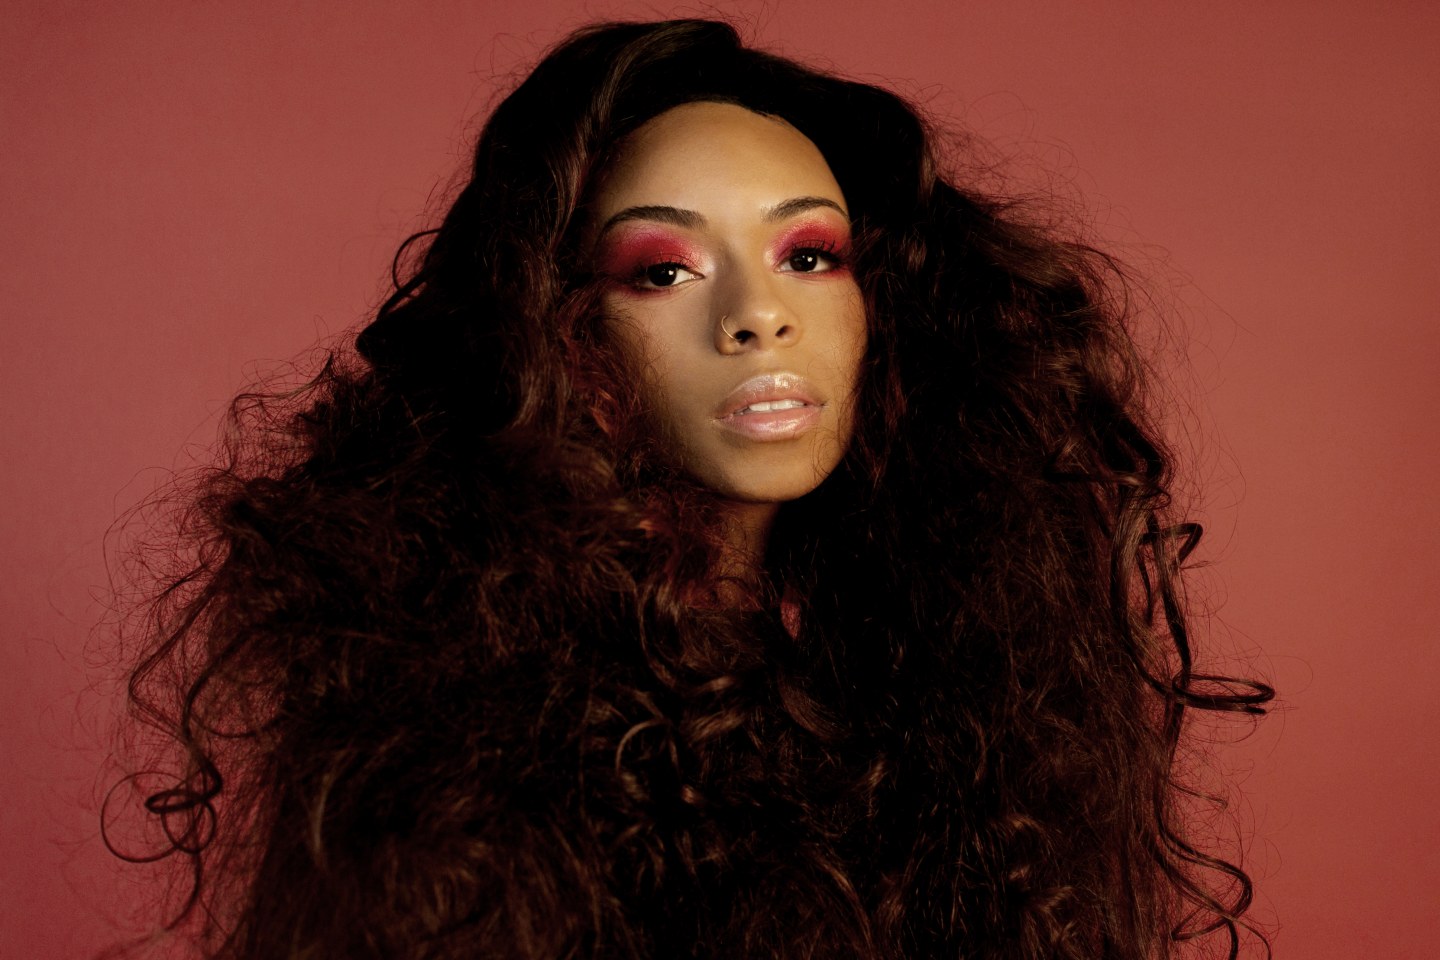 Ravyn Lenae makes vital songs to fall in and out of love to